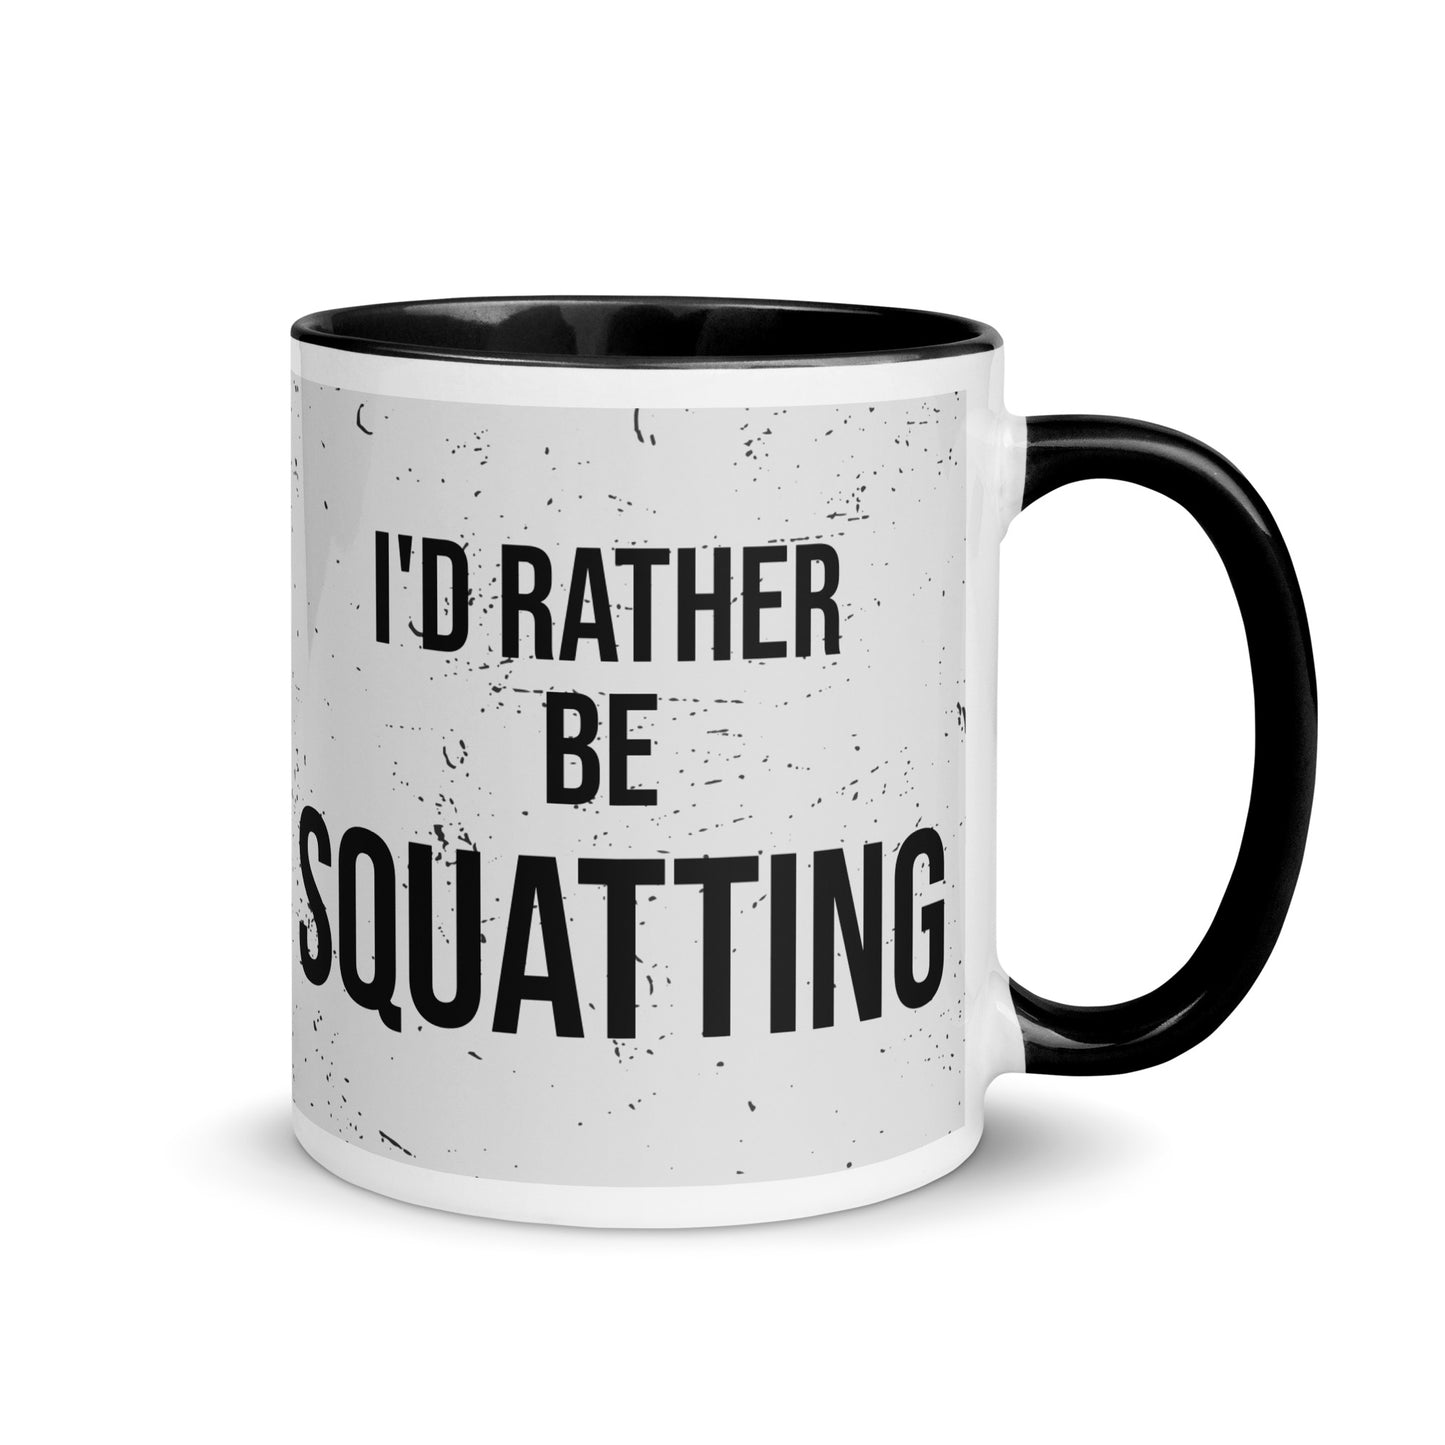 Black handled mug with I'd rather be squatting written on it, across a grey splatter background. A gift for someone who loves the gym.